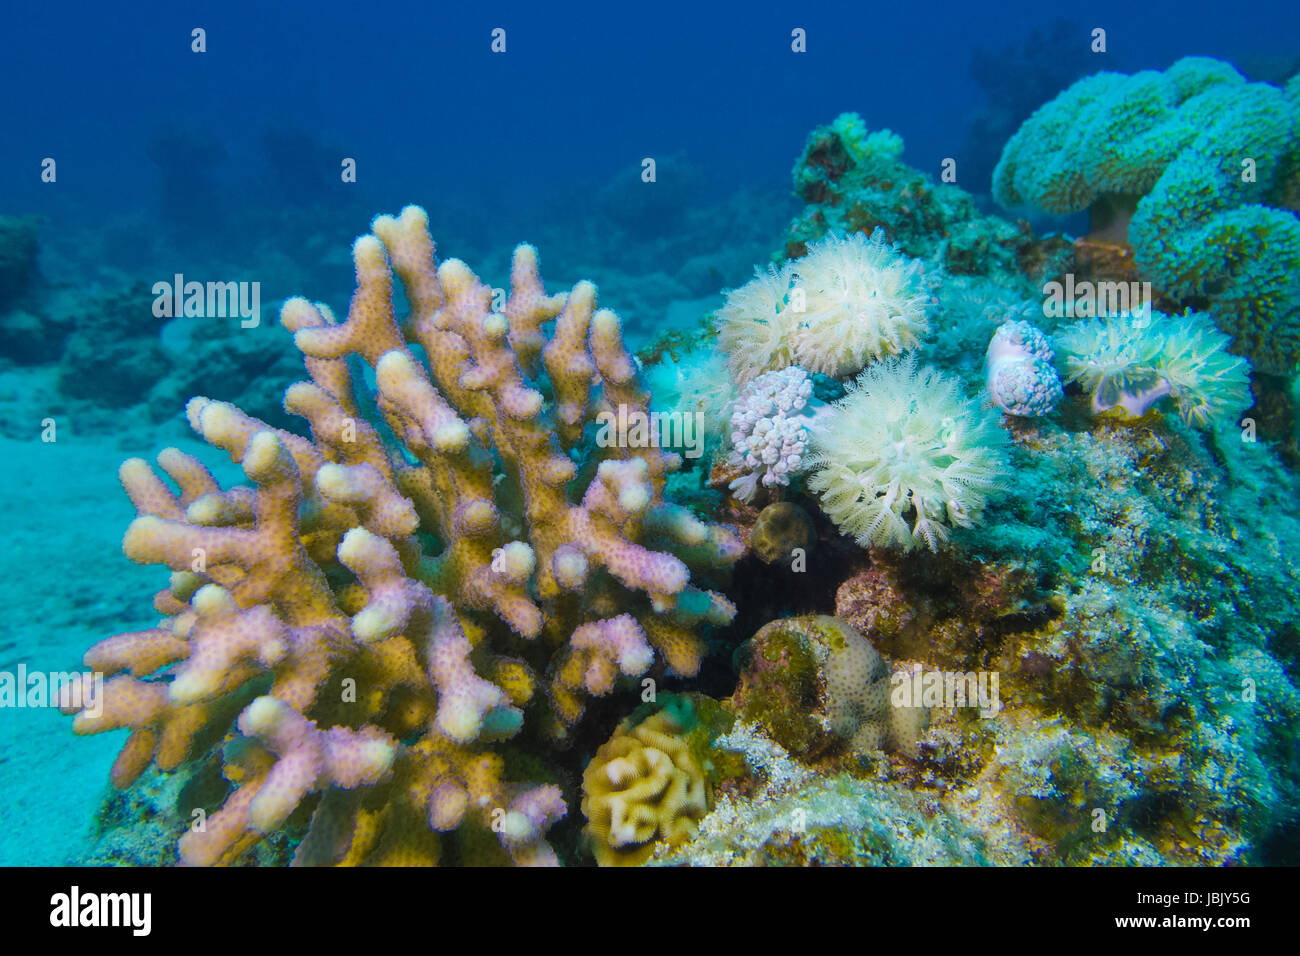 coral reef with hard and soft corals at the bottom of tropical sea Stock Photo